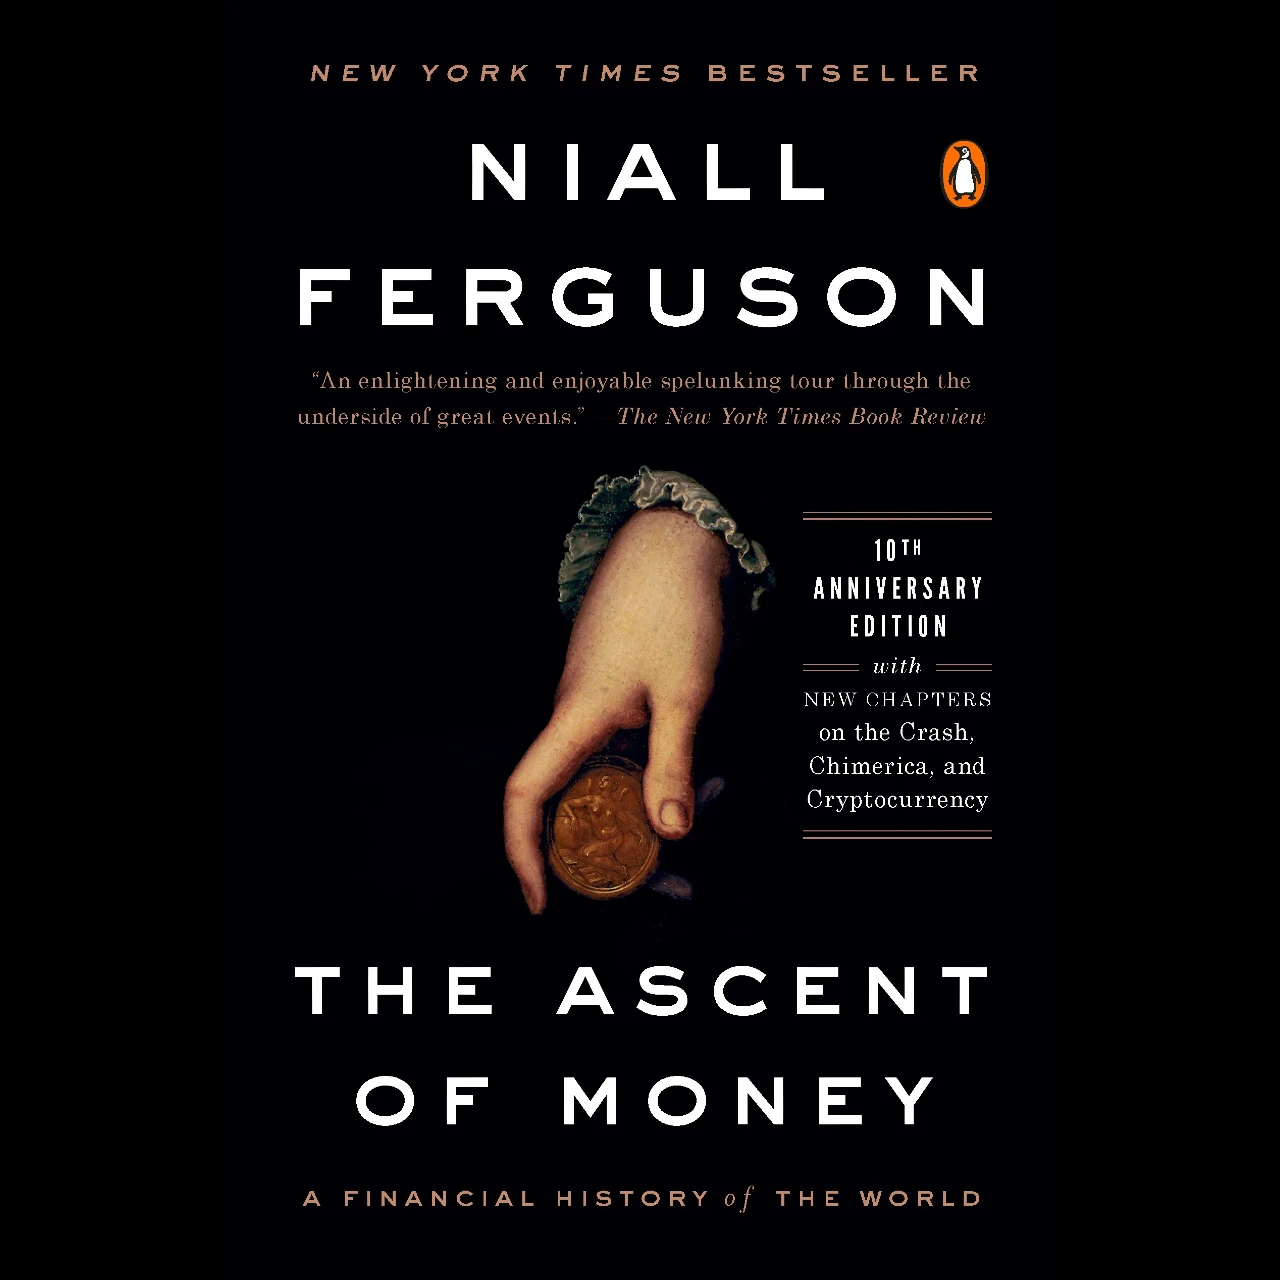 The Ascent of Money (by Niall Ferguson)